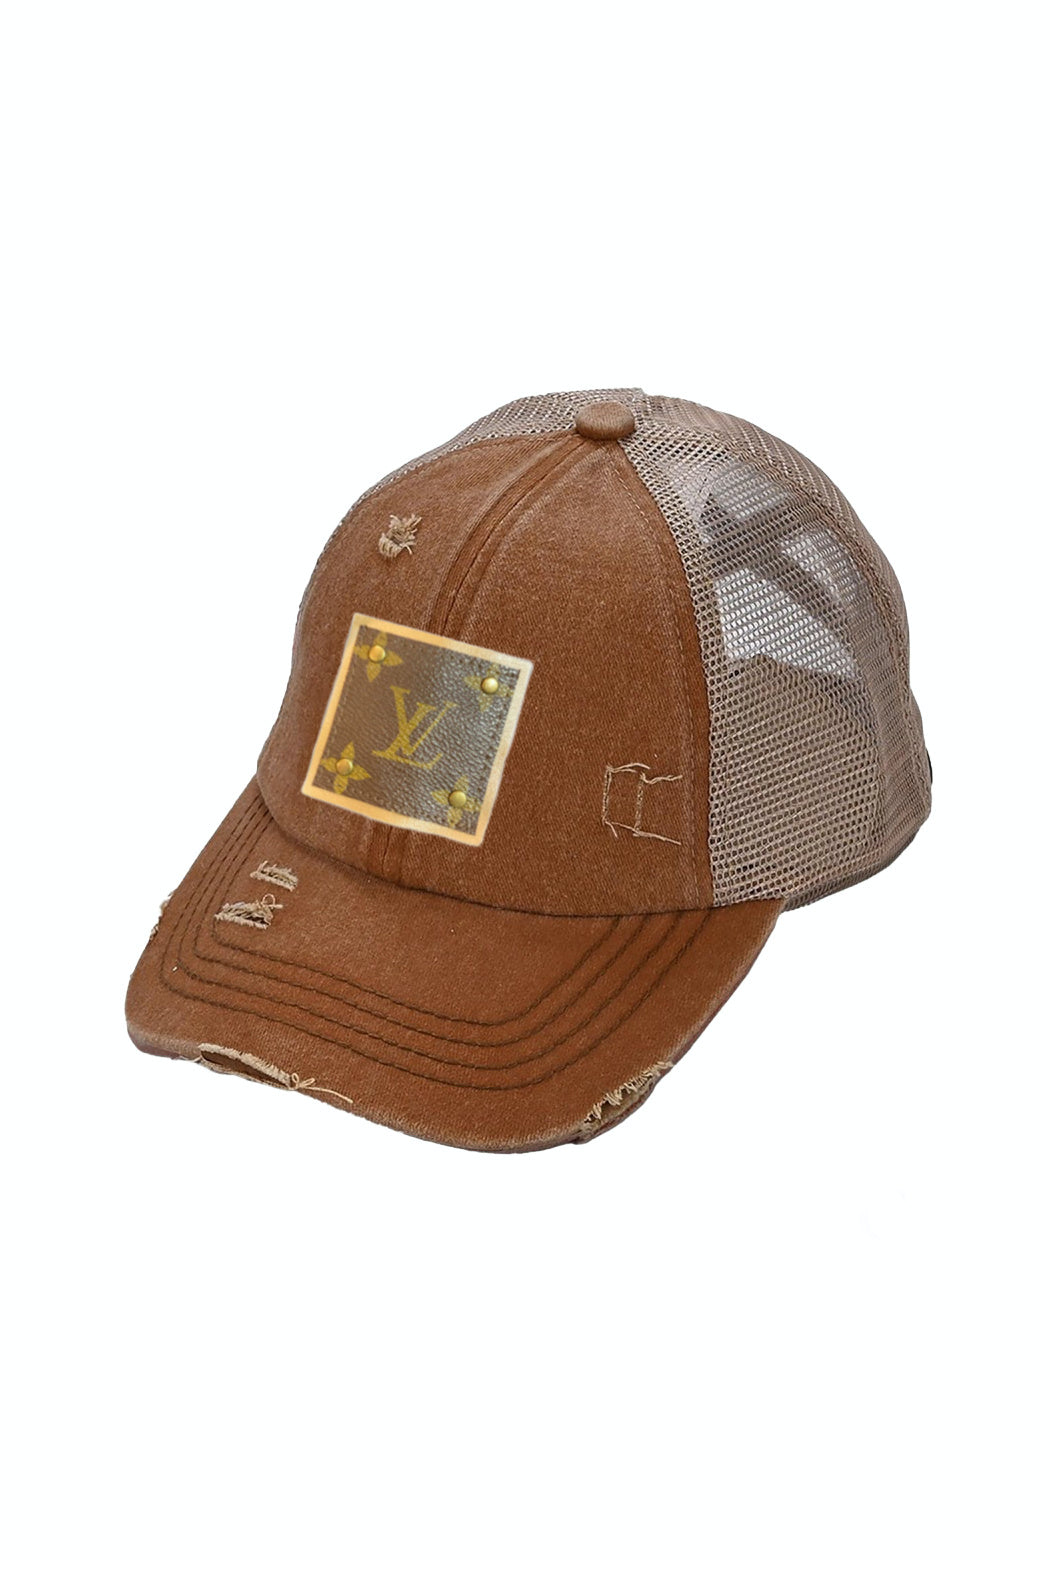 Upcycled Distressed Trucker Cap -  available in 13 colors